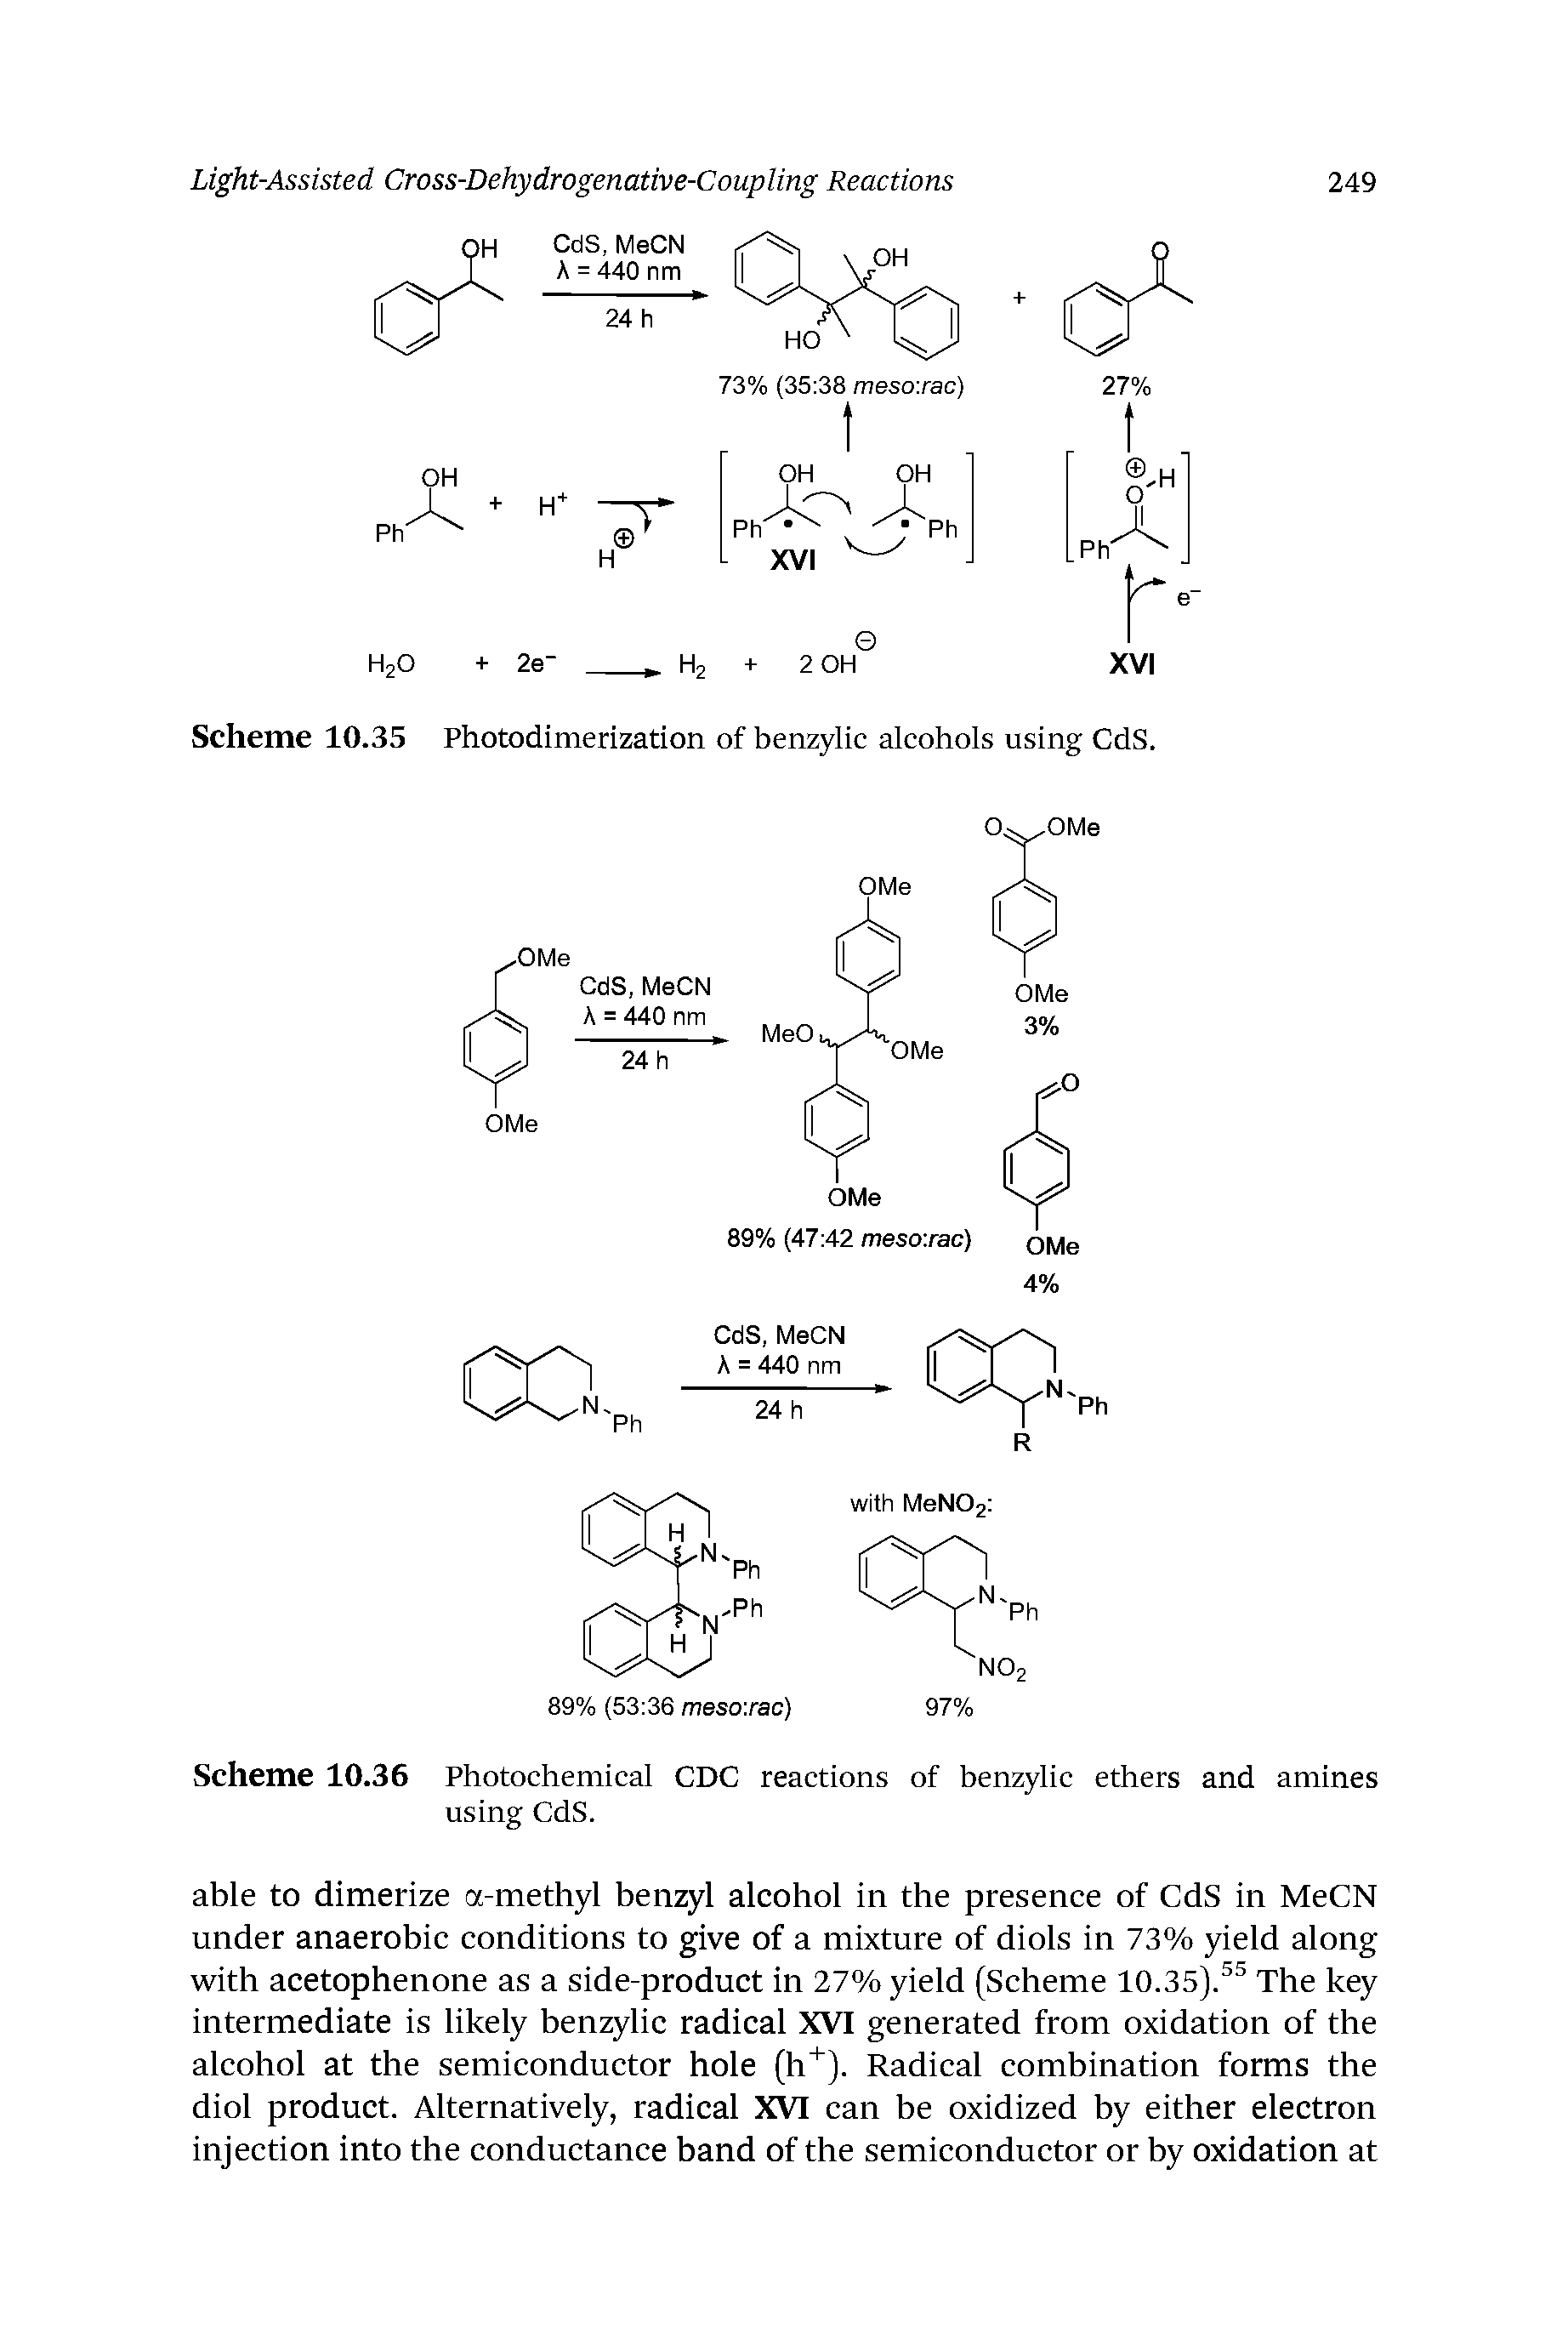 Scheme 10.36 Photochemical CDC reactions of benzylic ethers and amines using CdS.